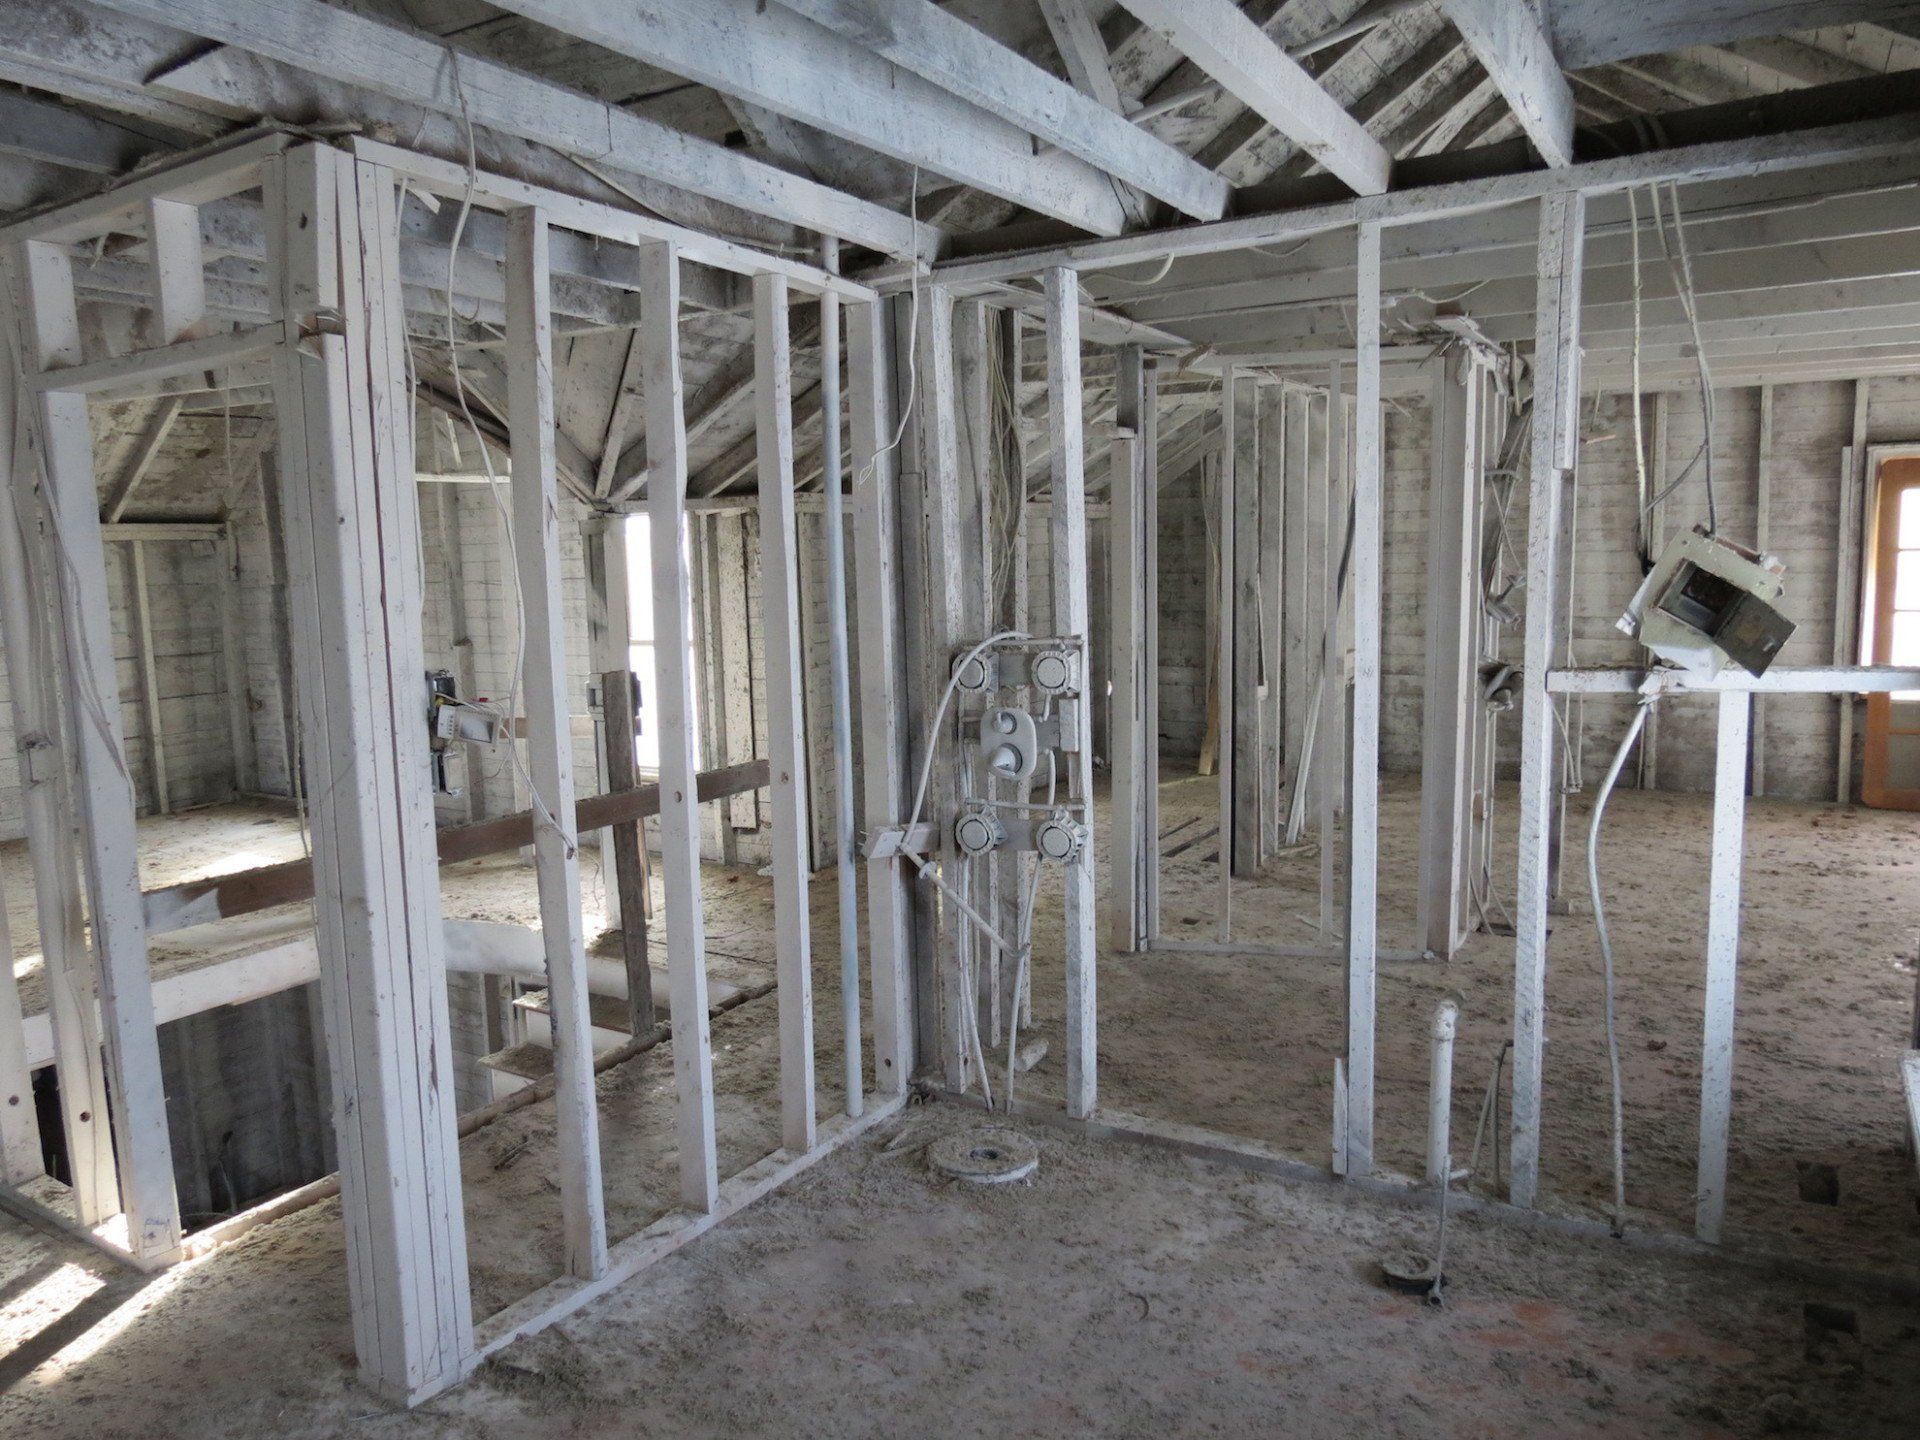 A room with a lot of wooden beams and a lot of wires hanging from the ceiling.